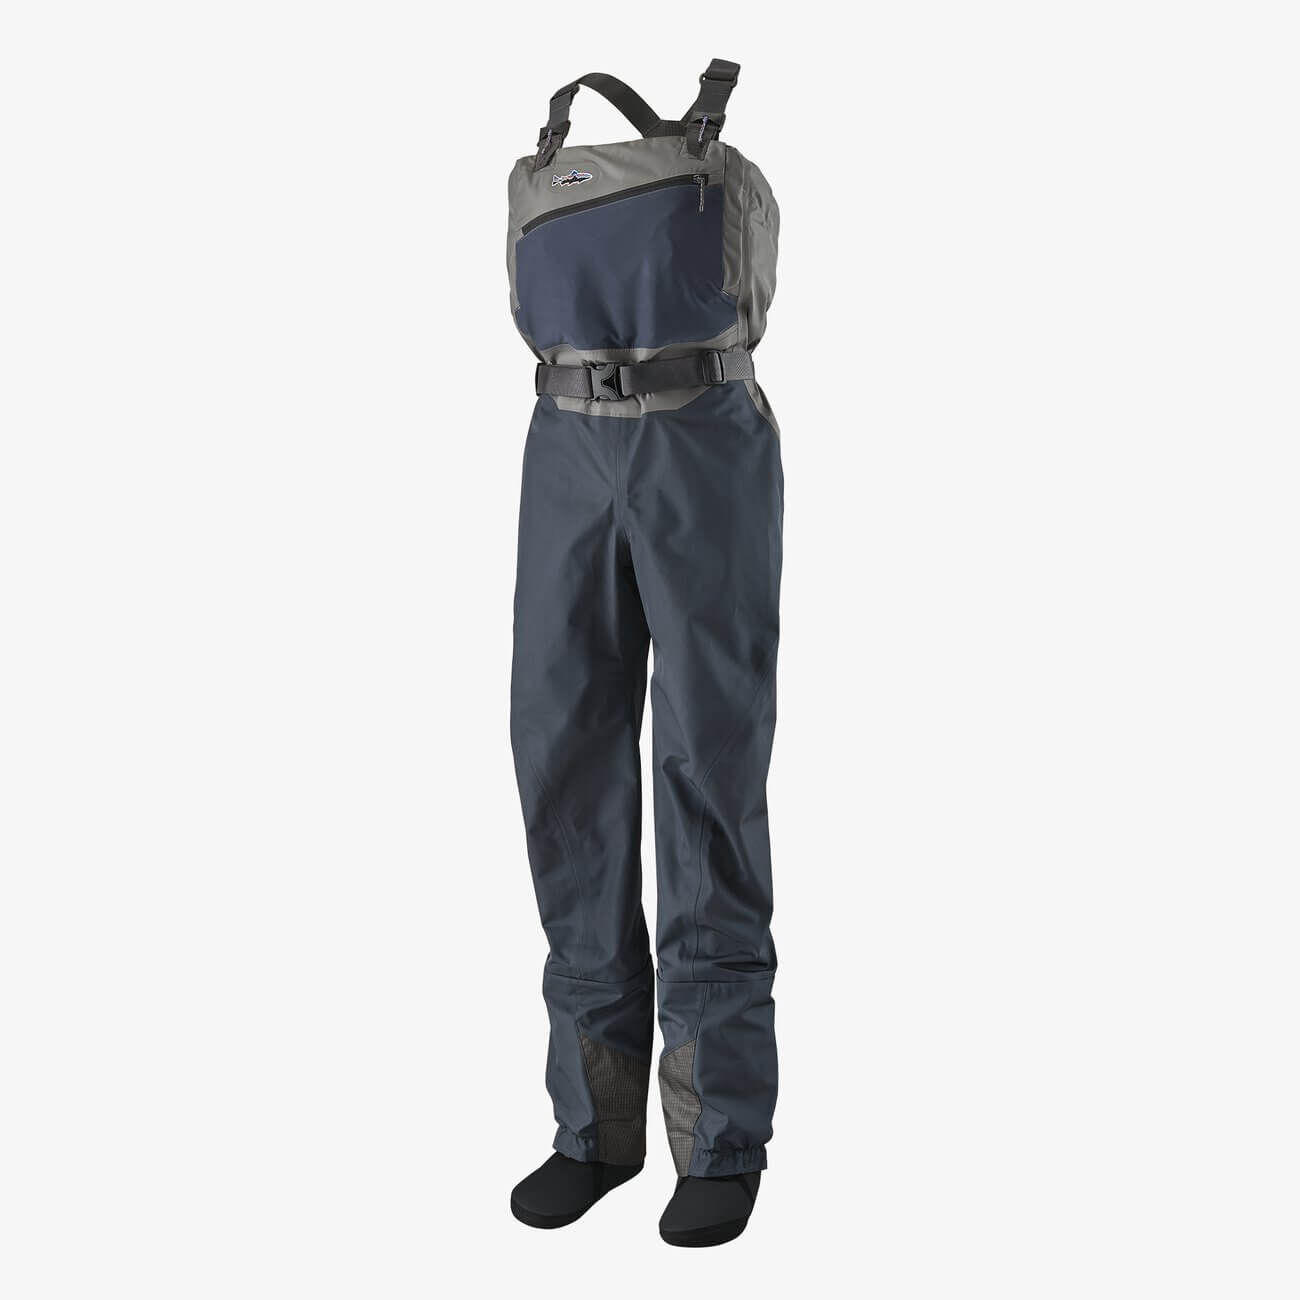 Patagonia Women's Swiftcurrent Waders 2020 - SSS (Small Short)